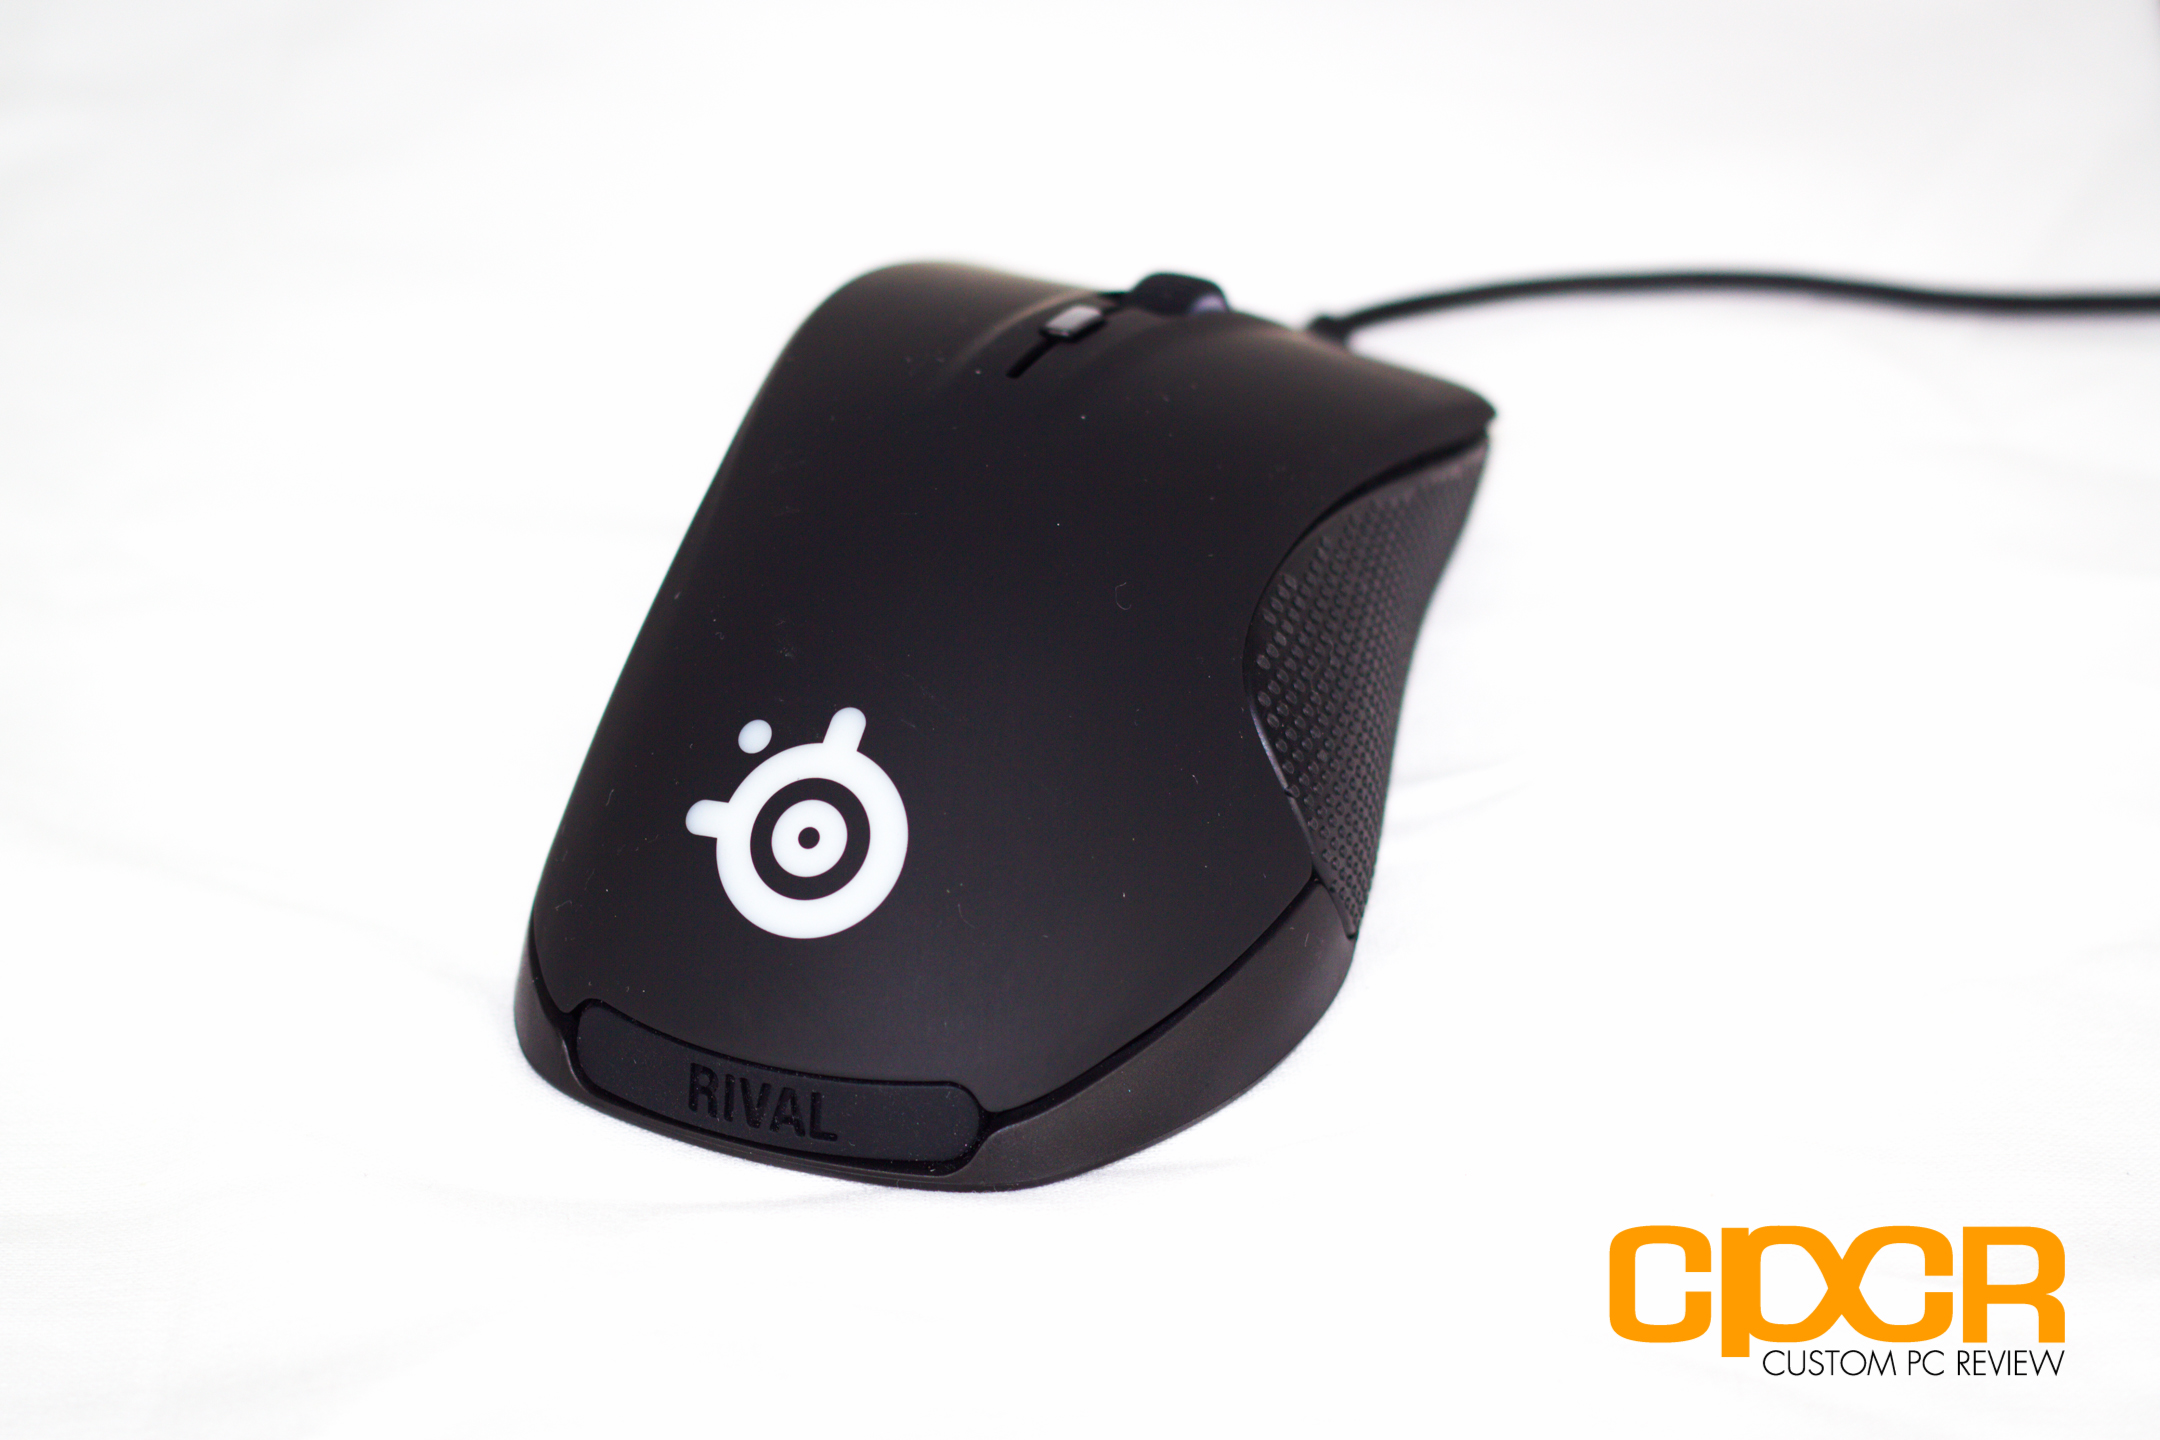 Review: SteelSeries Rival Gaming Mouse